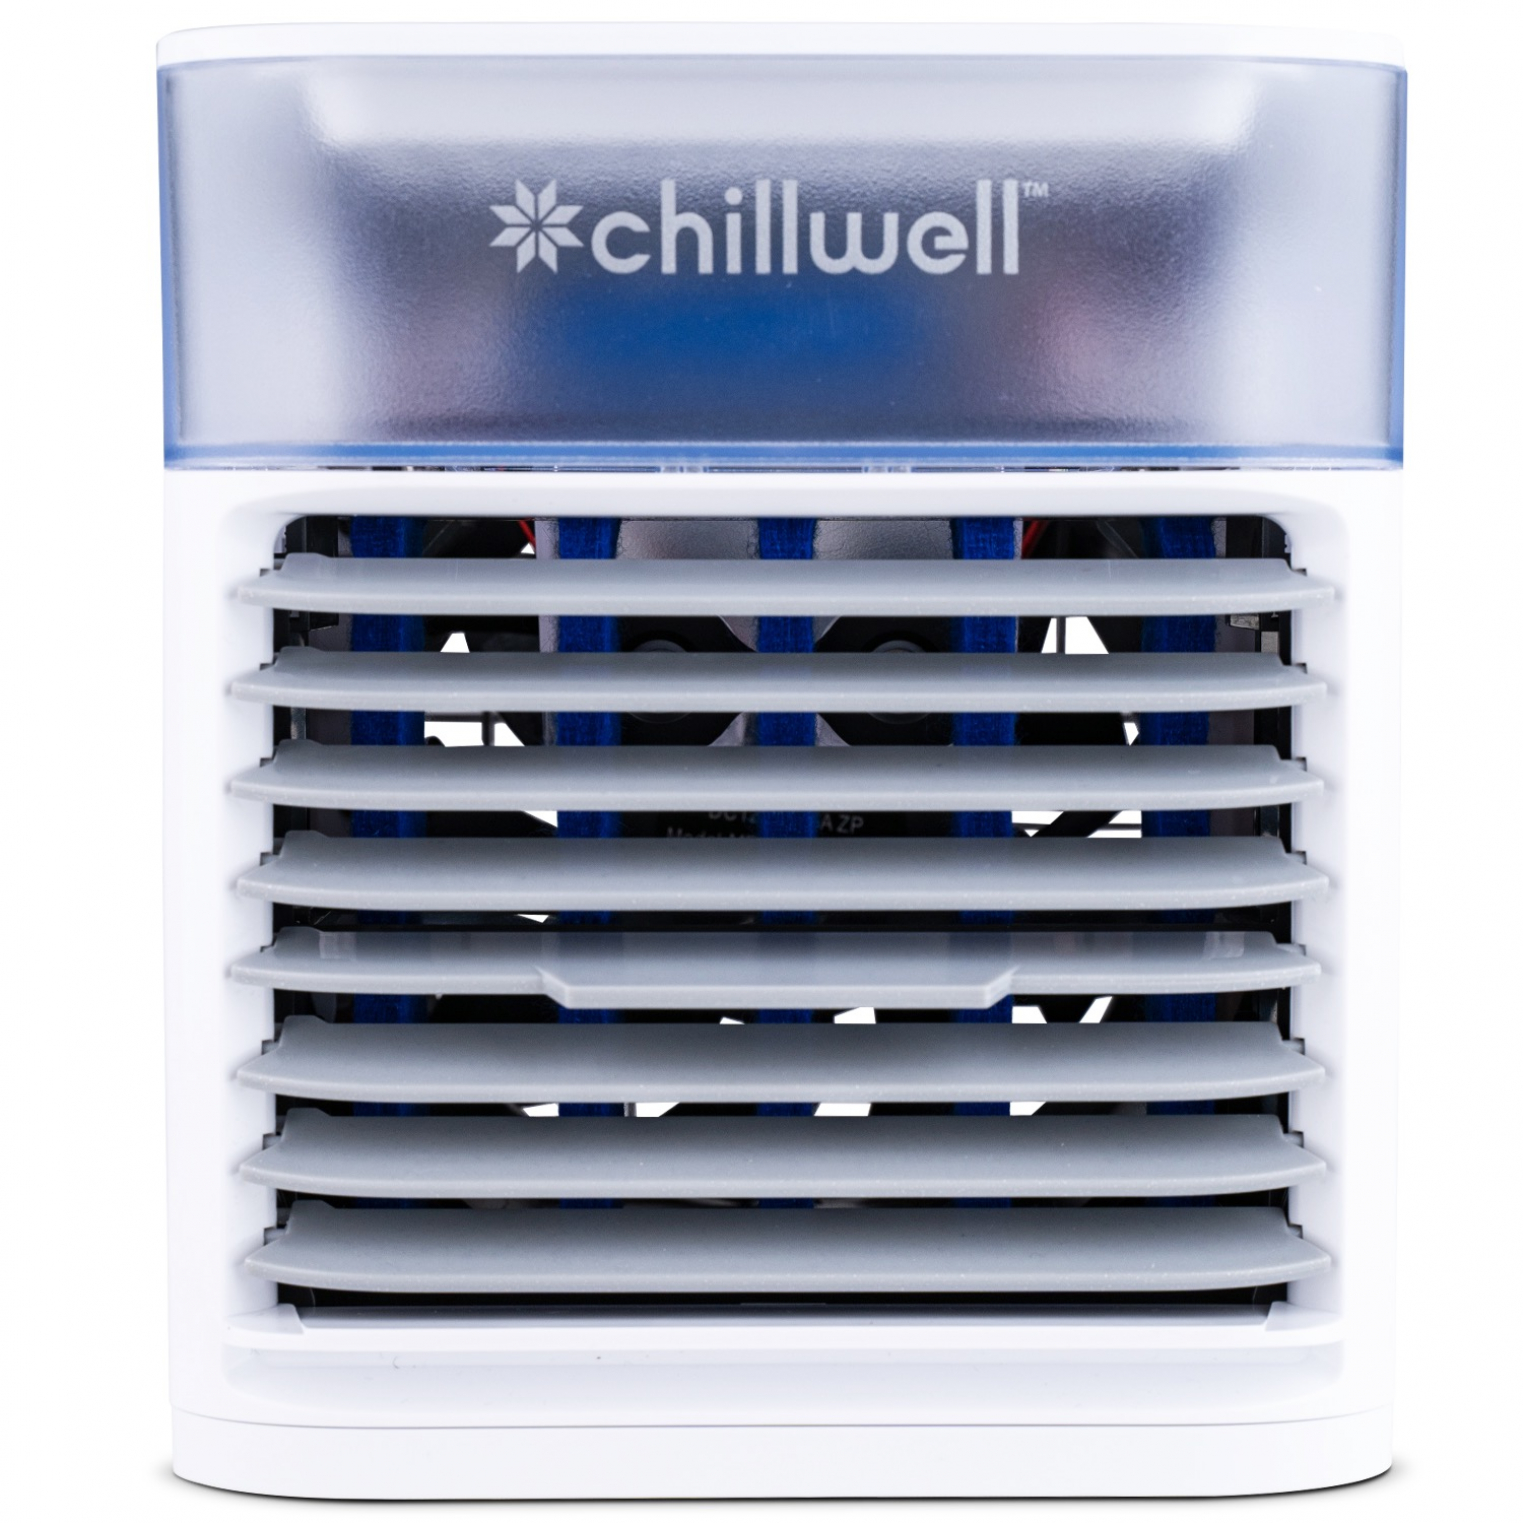 Chillwell AC Portable Air Conditioner For Room